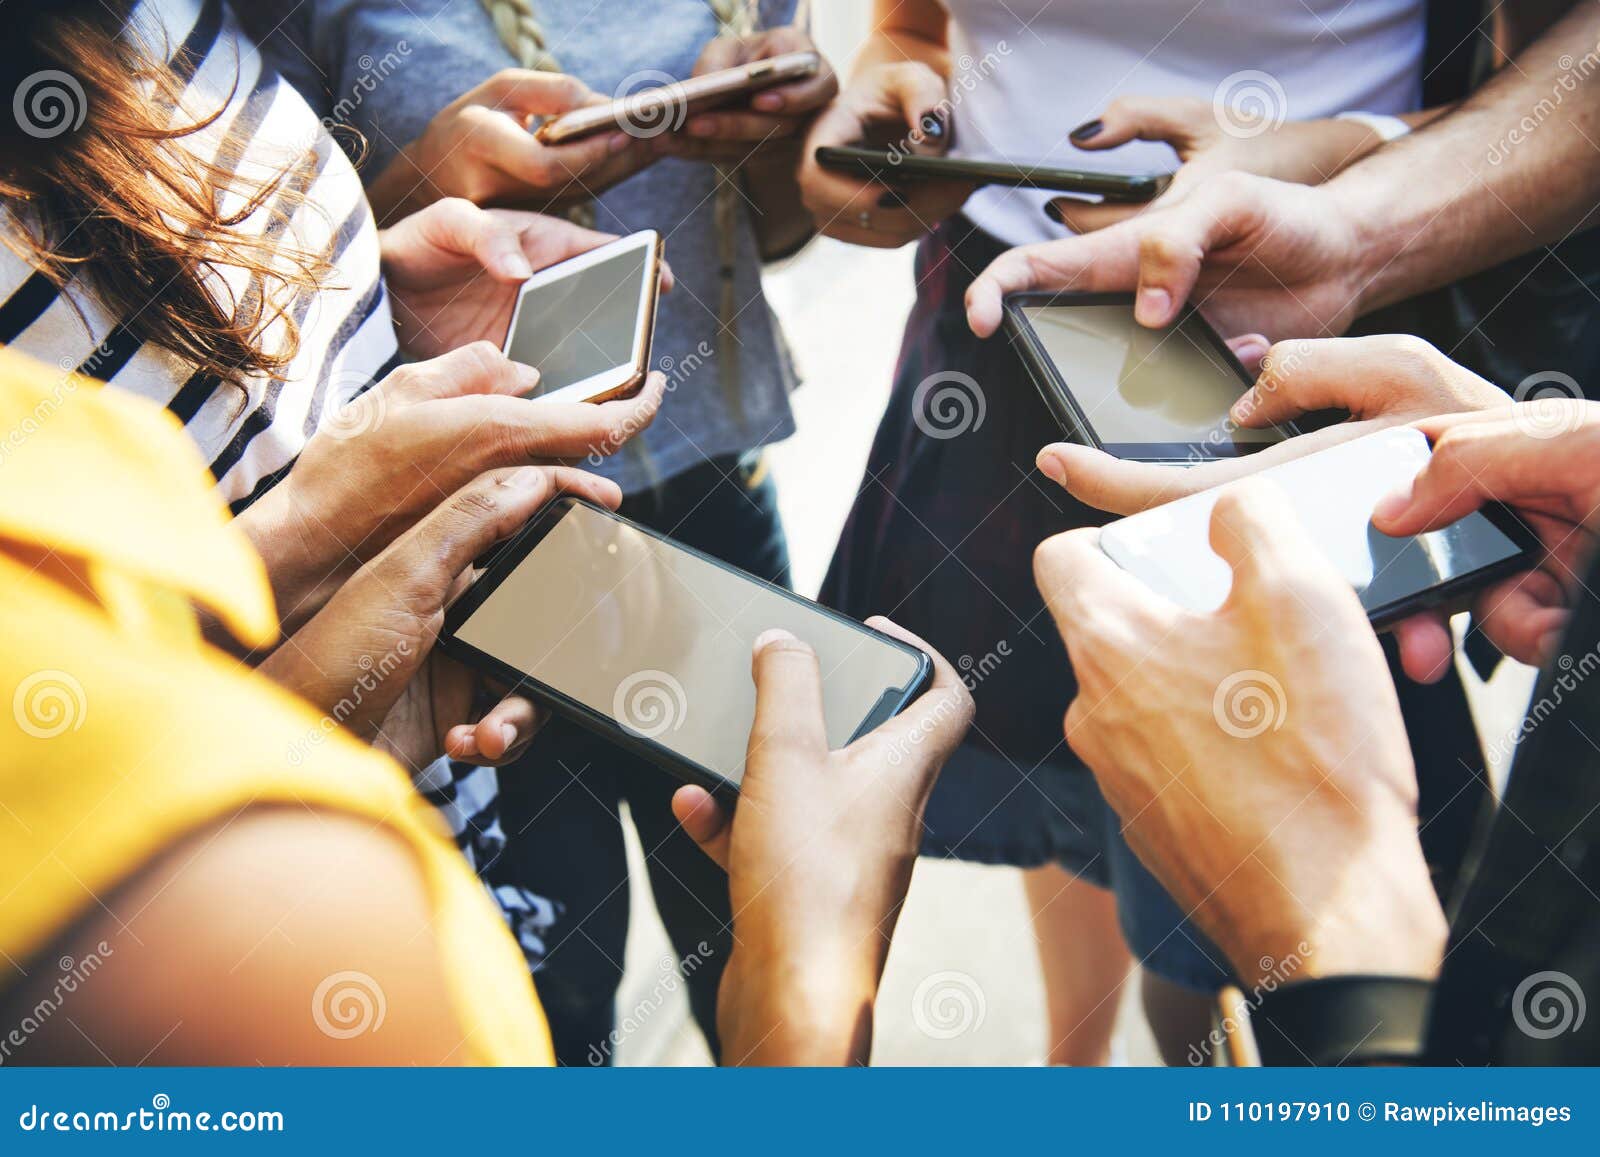 young adult friends using smartphones together outdoors youth cu